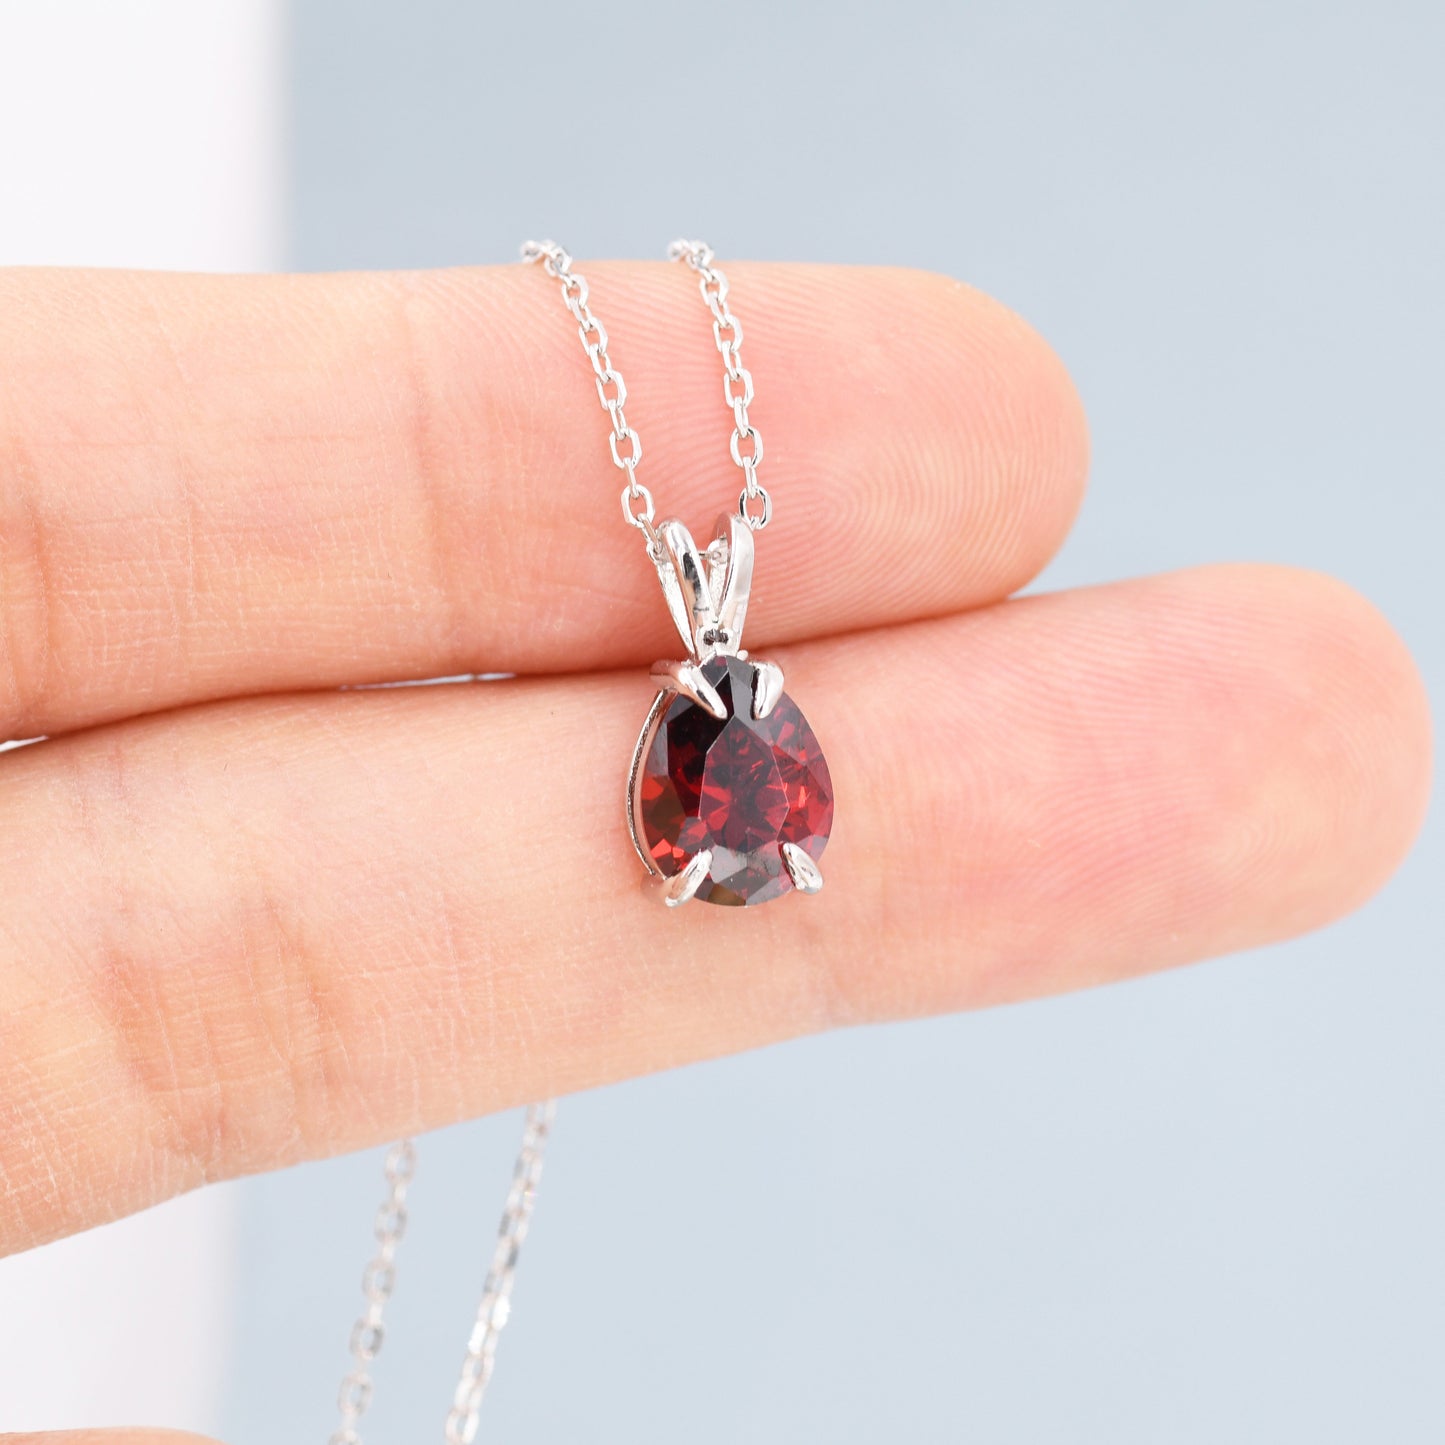 Garnet Red Pear Cut CZ Necklace in Sterling Silver, 7 x 9mm, Dark Red Droplet necklace, Diamond CZ, January Birthstone